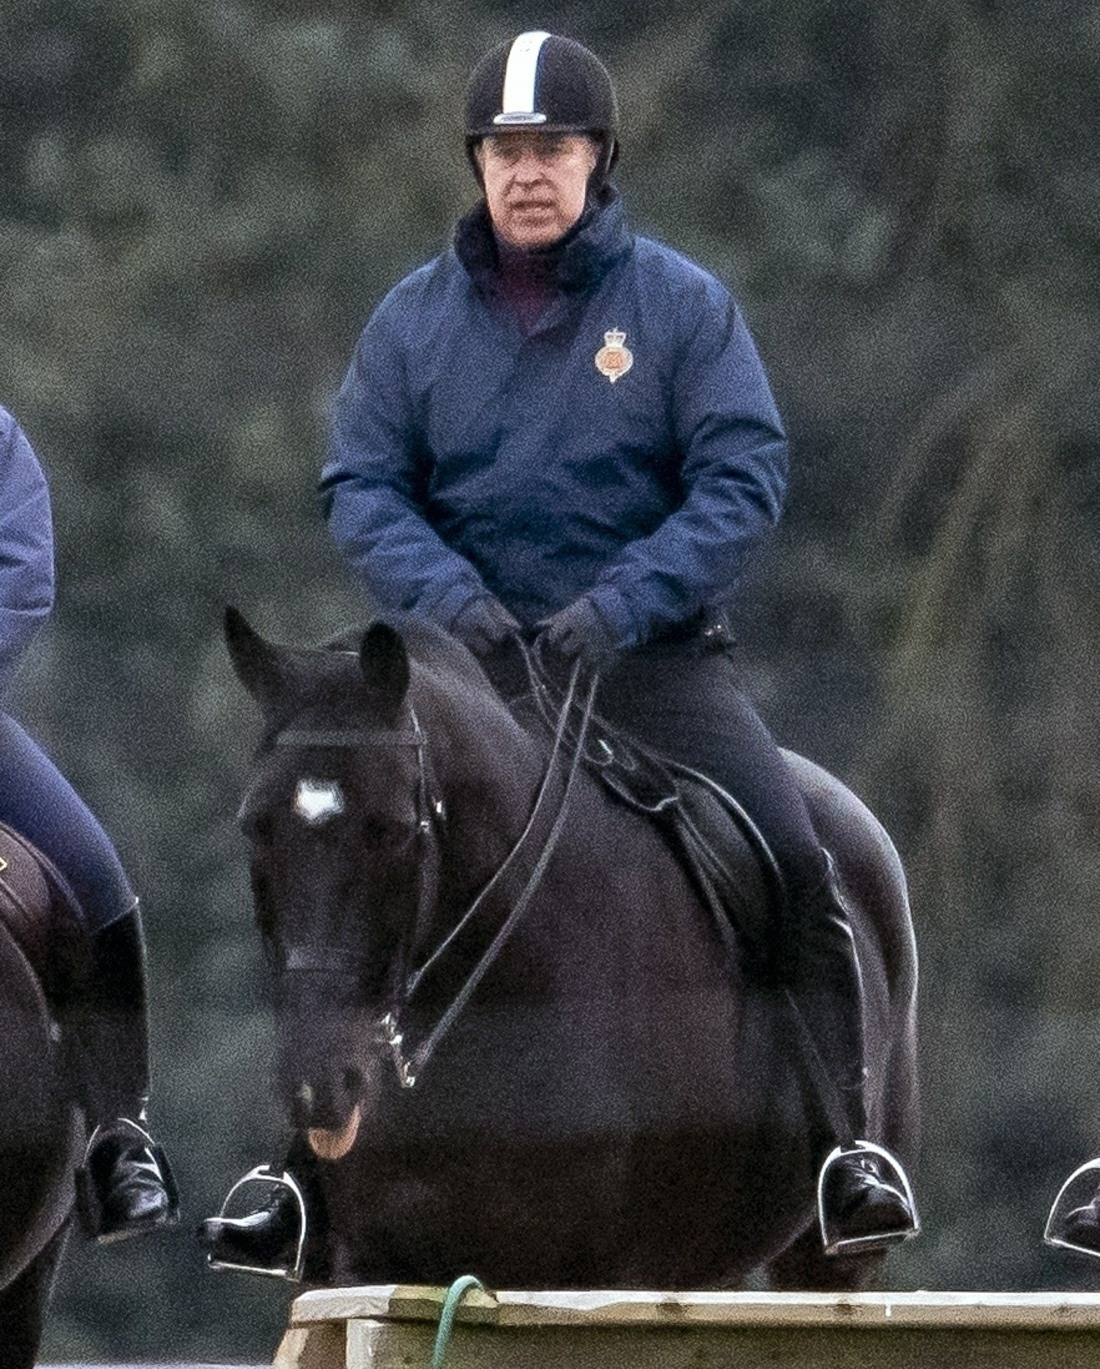 Prince Andrew looks at ease riding in Windsor Park